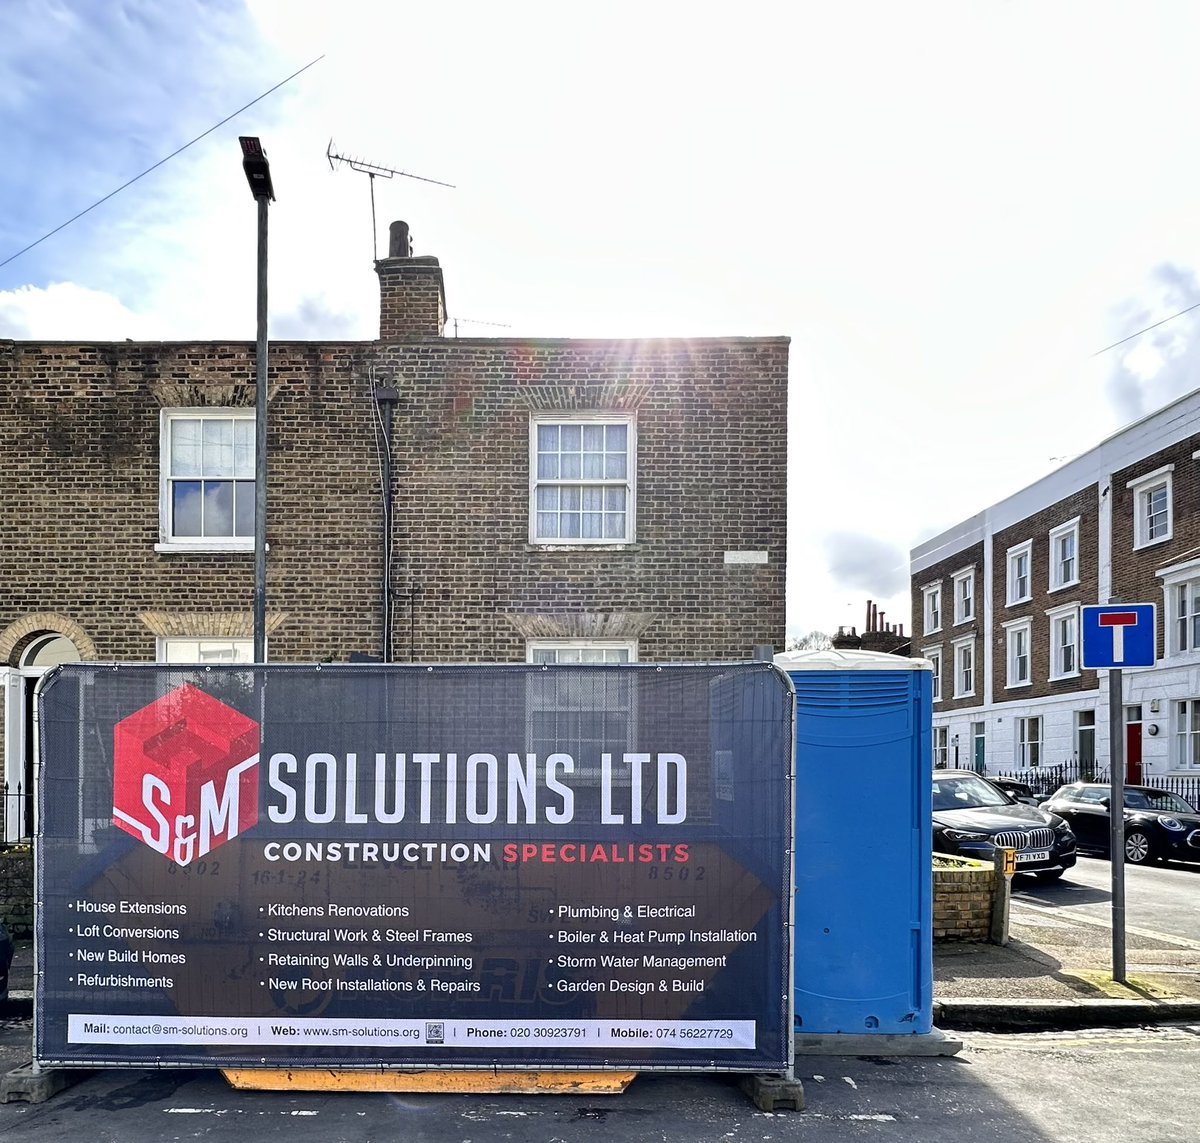 We're hitting the ground running this week, launching two new flat roof projects that will soon grace your your neighbourhood in #Greenwich Thinking about upgrading your own roof? #FlatRoofs #RoofingExcellence